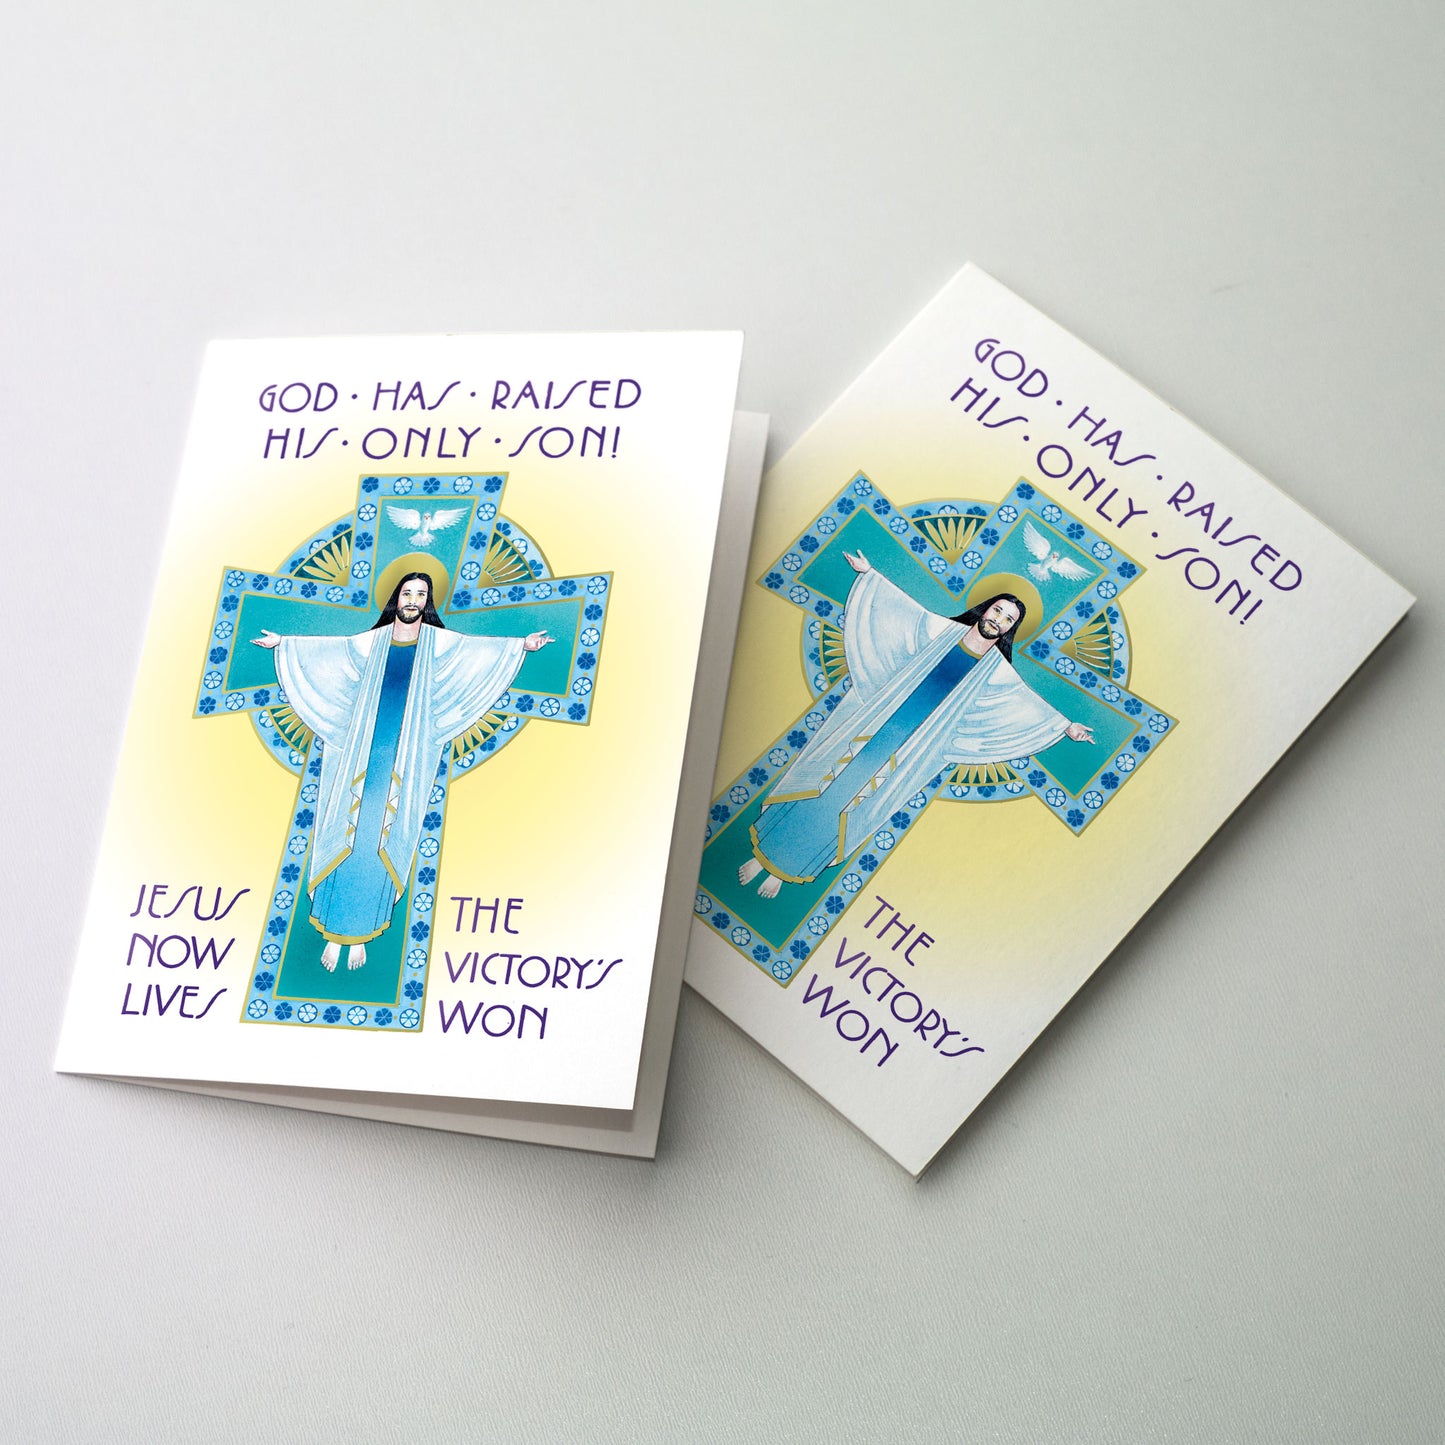 God Has Raised His Only Son! - Easter Card